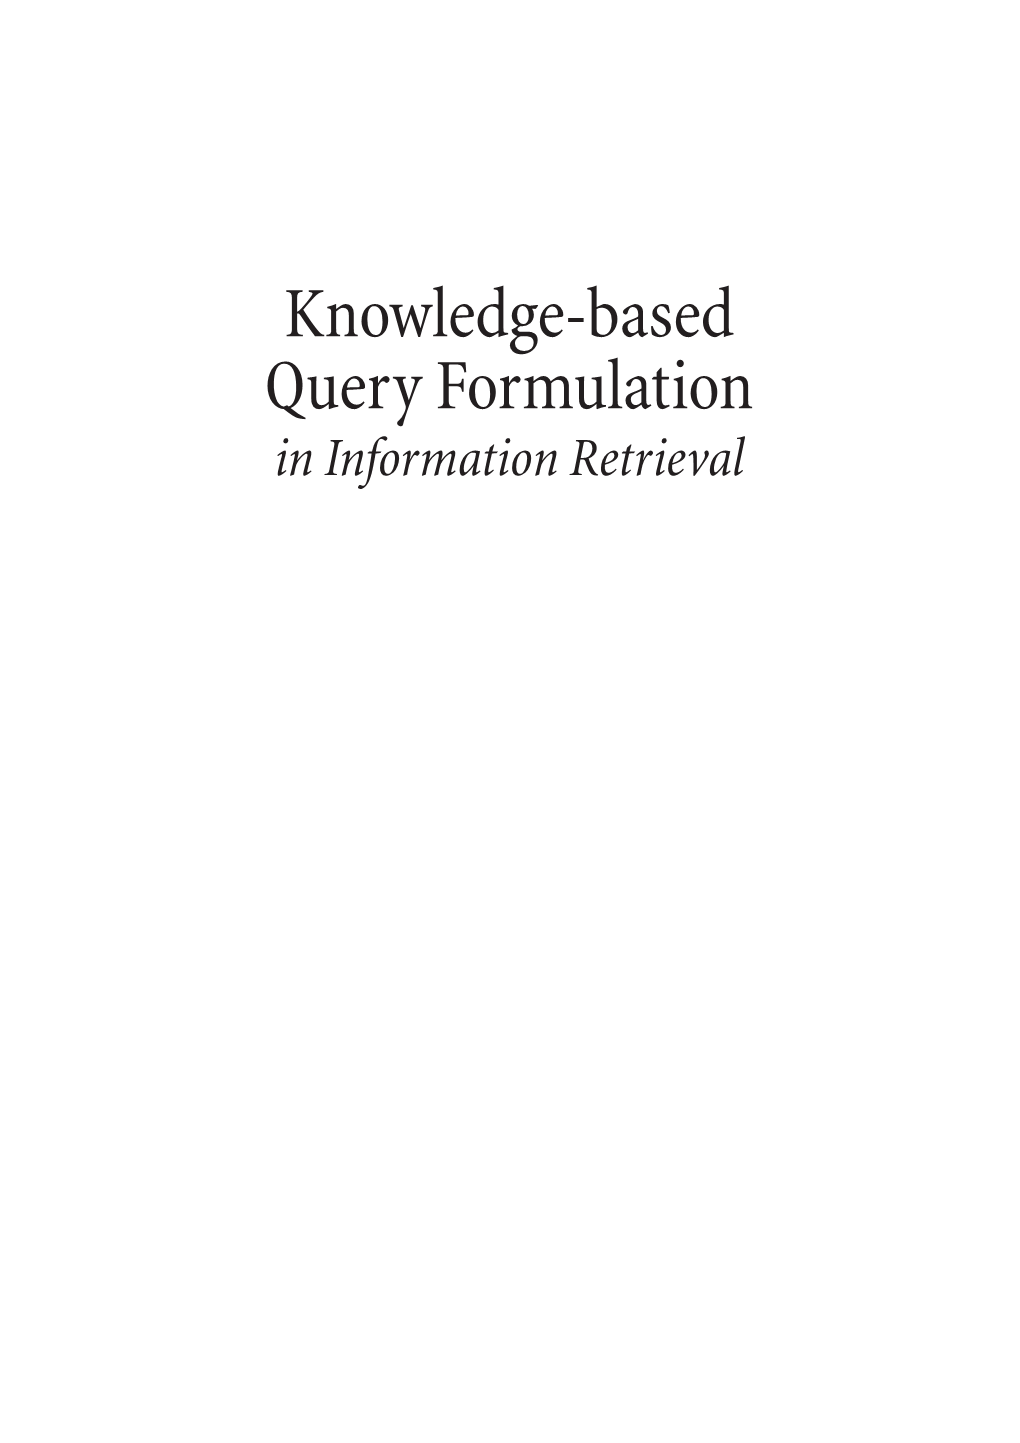 Knowledge-Based Query Formulation in Information Retrieval